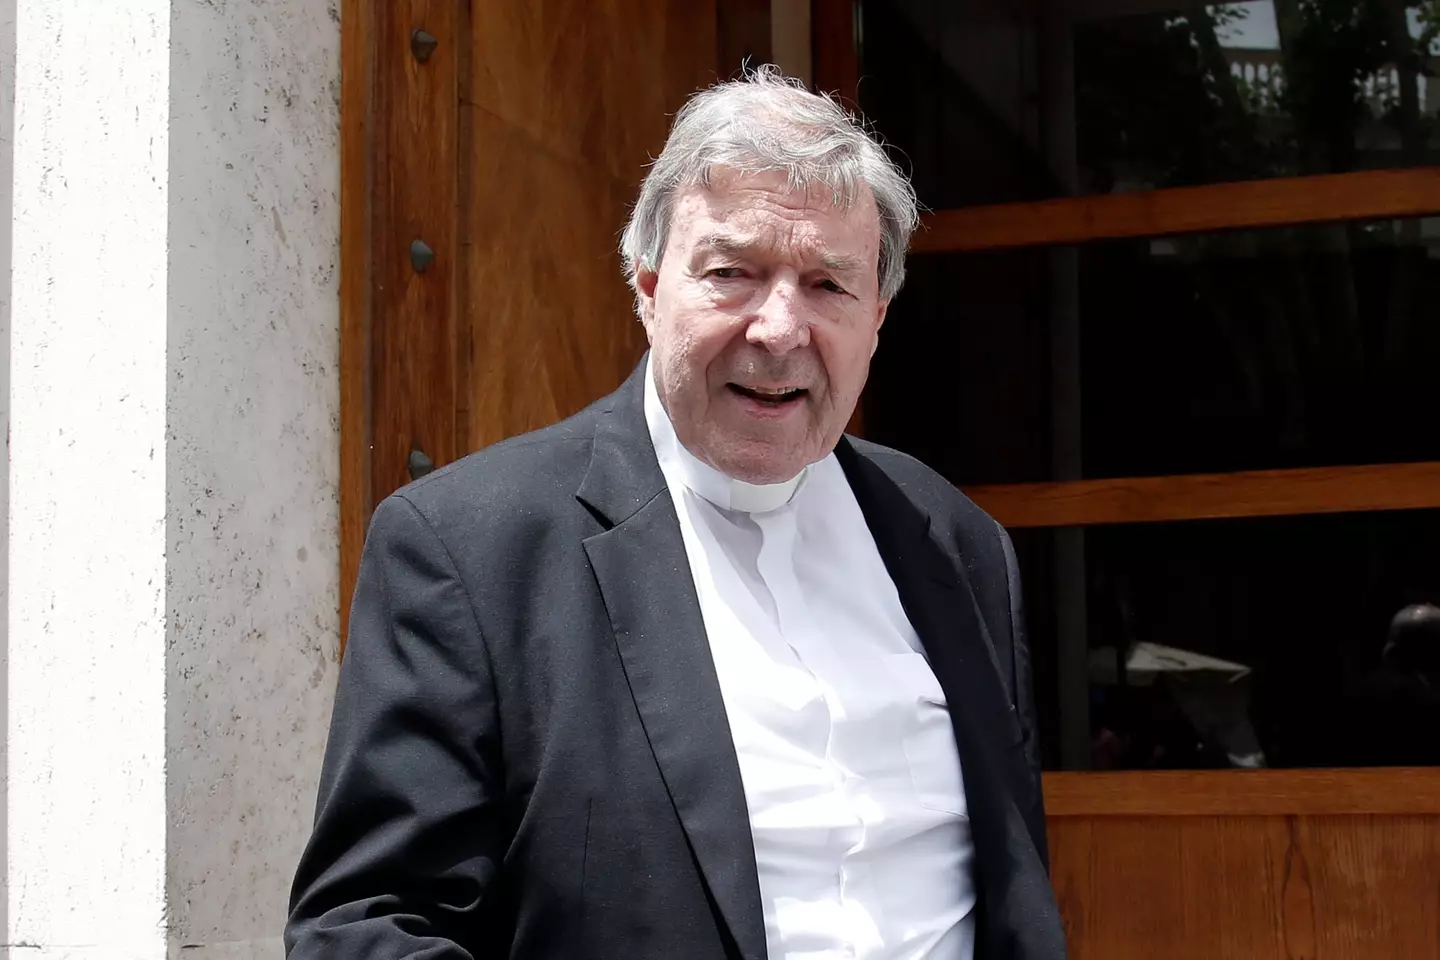 Pell, on the day he was charged with sexual assault of a minor in 2017.